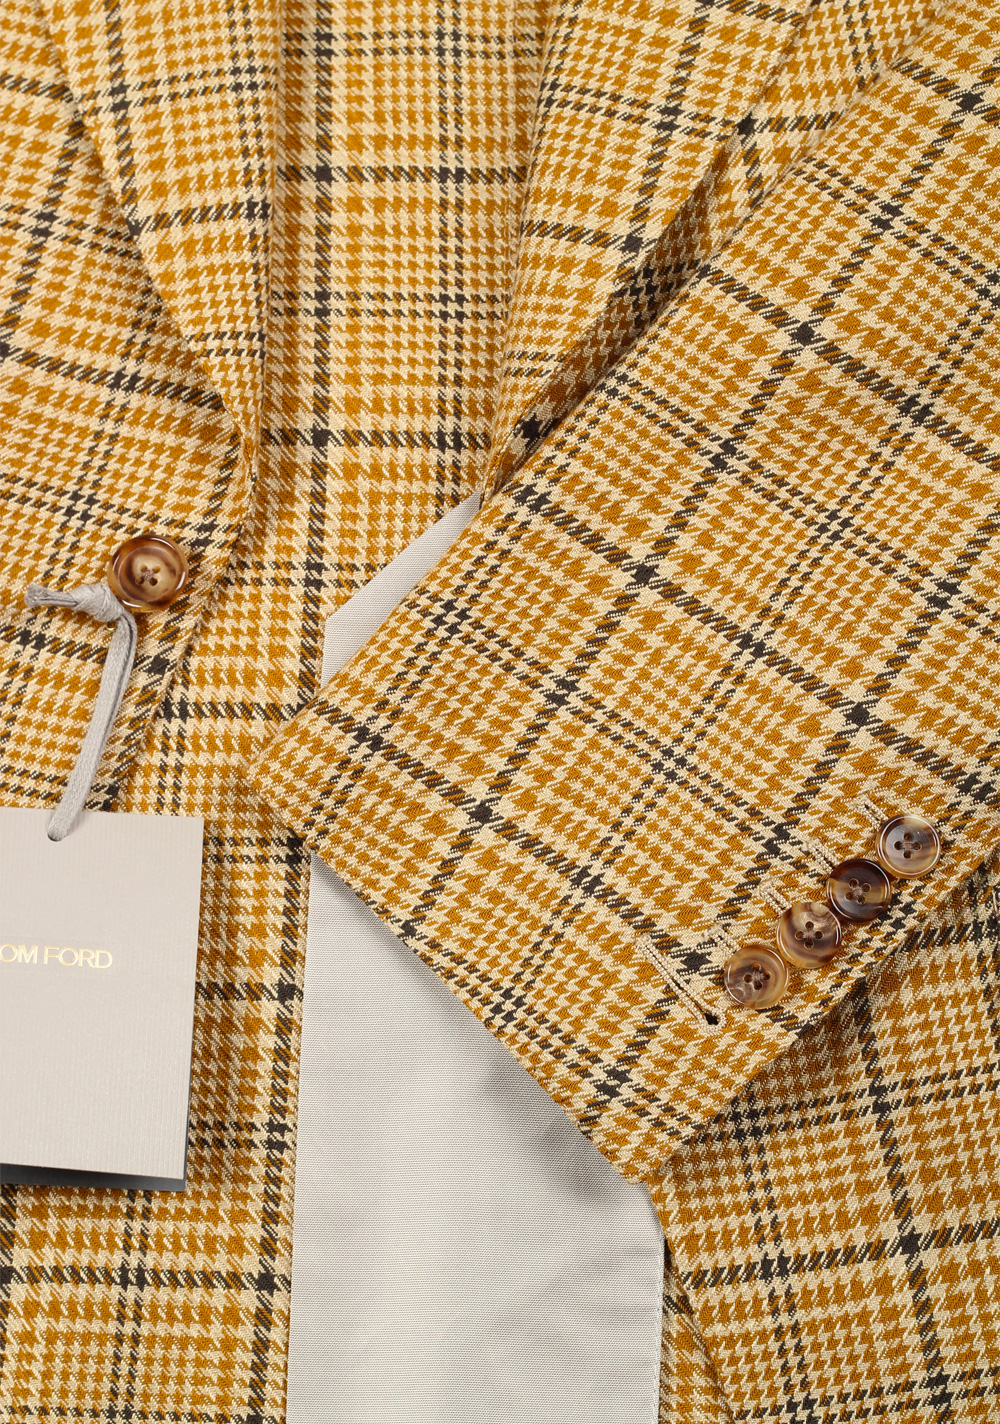 TOM FORD Atticus Yellow Checked Suit Size 46 / 36R U.S. | Costume Limité